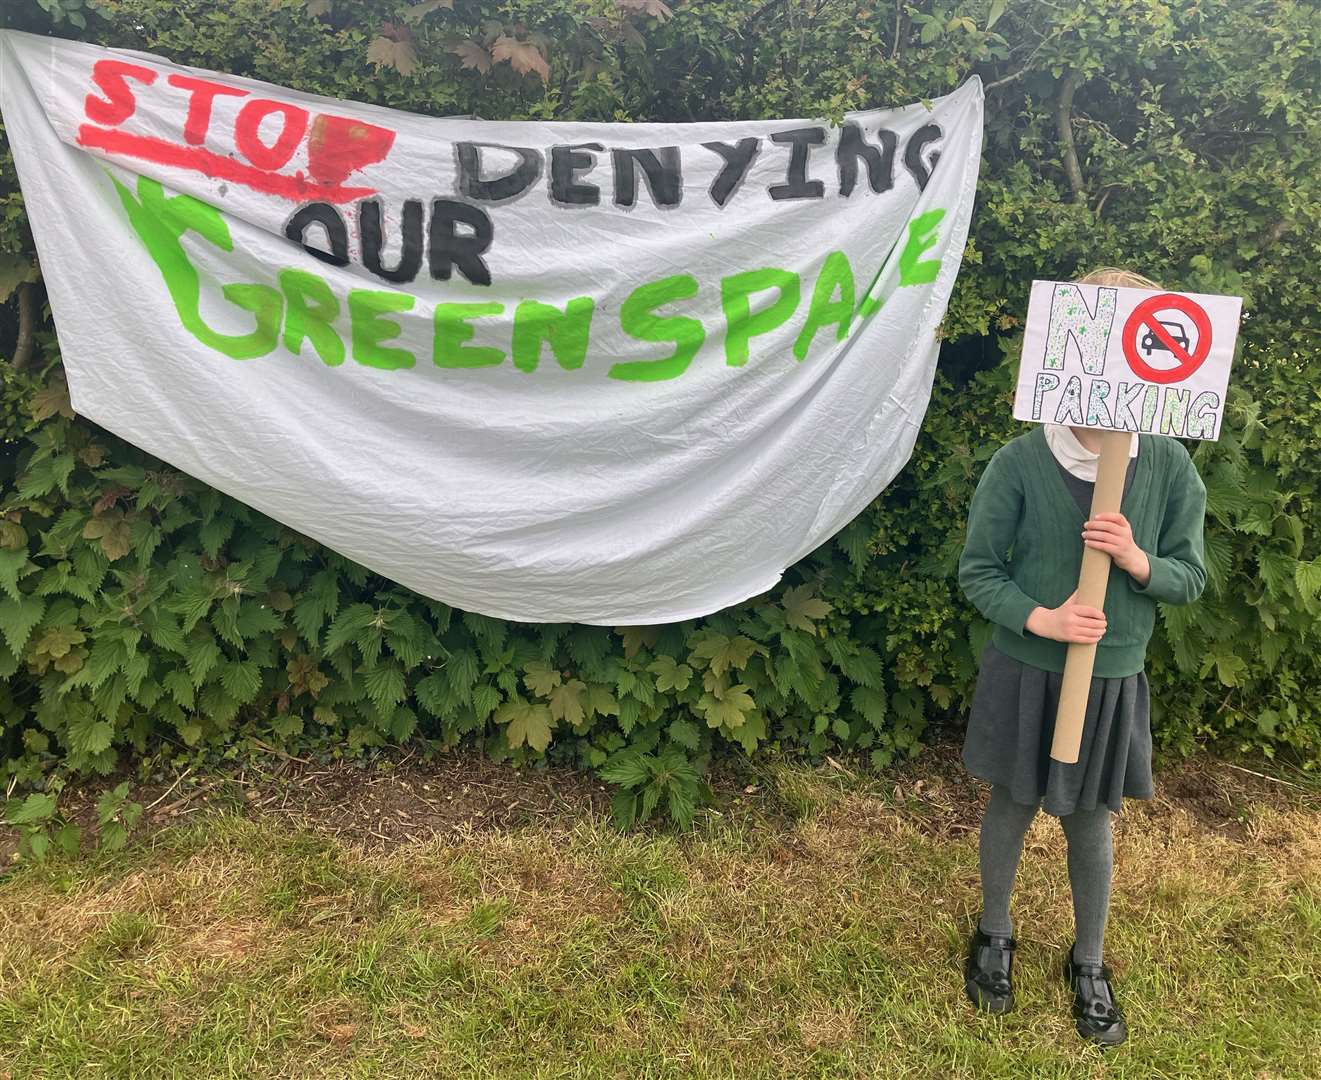 "Stop denying our green space"